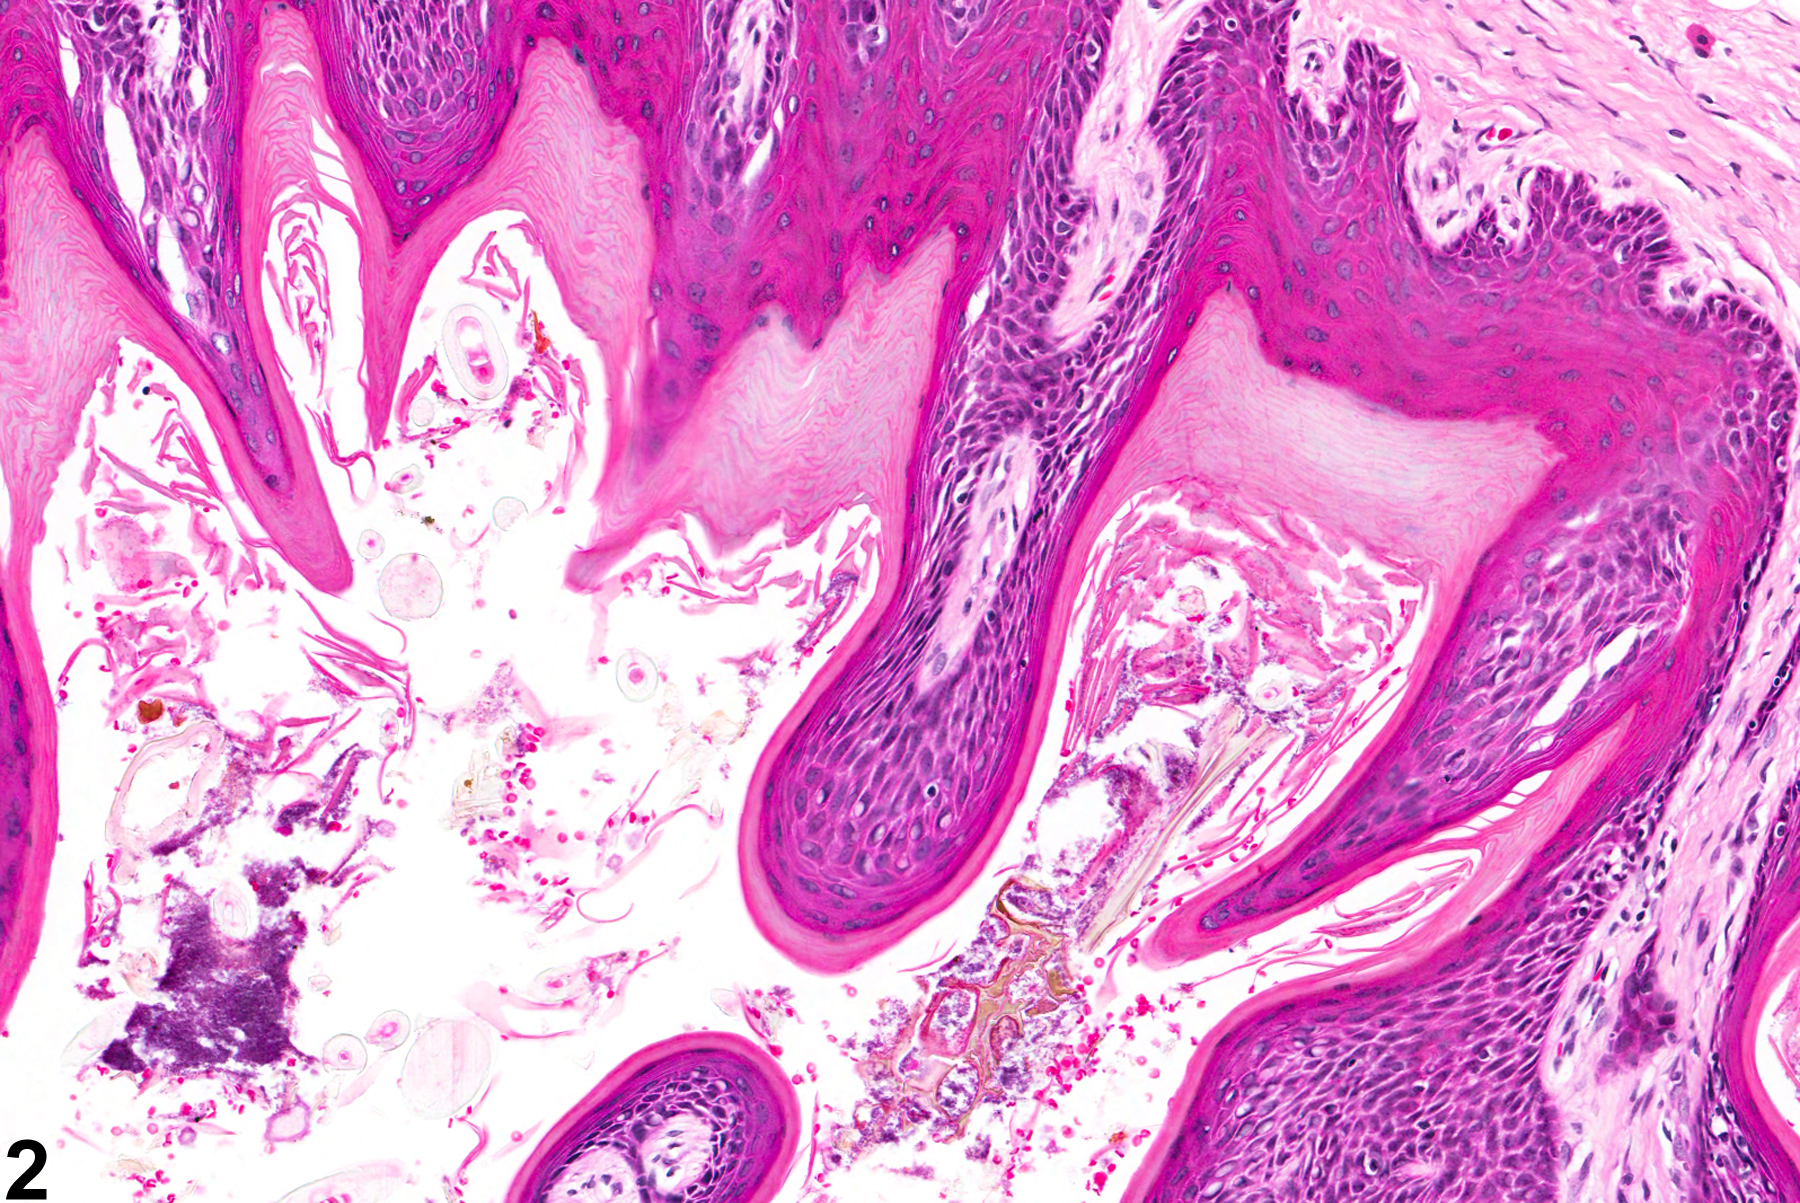 Image of hyperplasia, squamous in the oral mucosa from a female F344/N rat in a chronic study